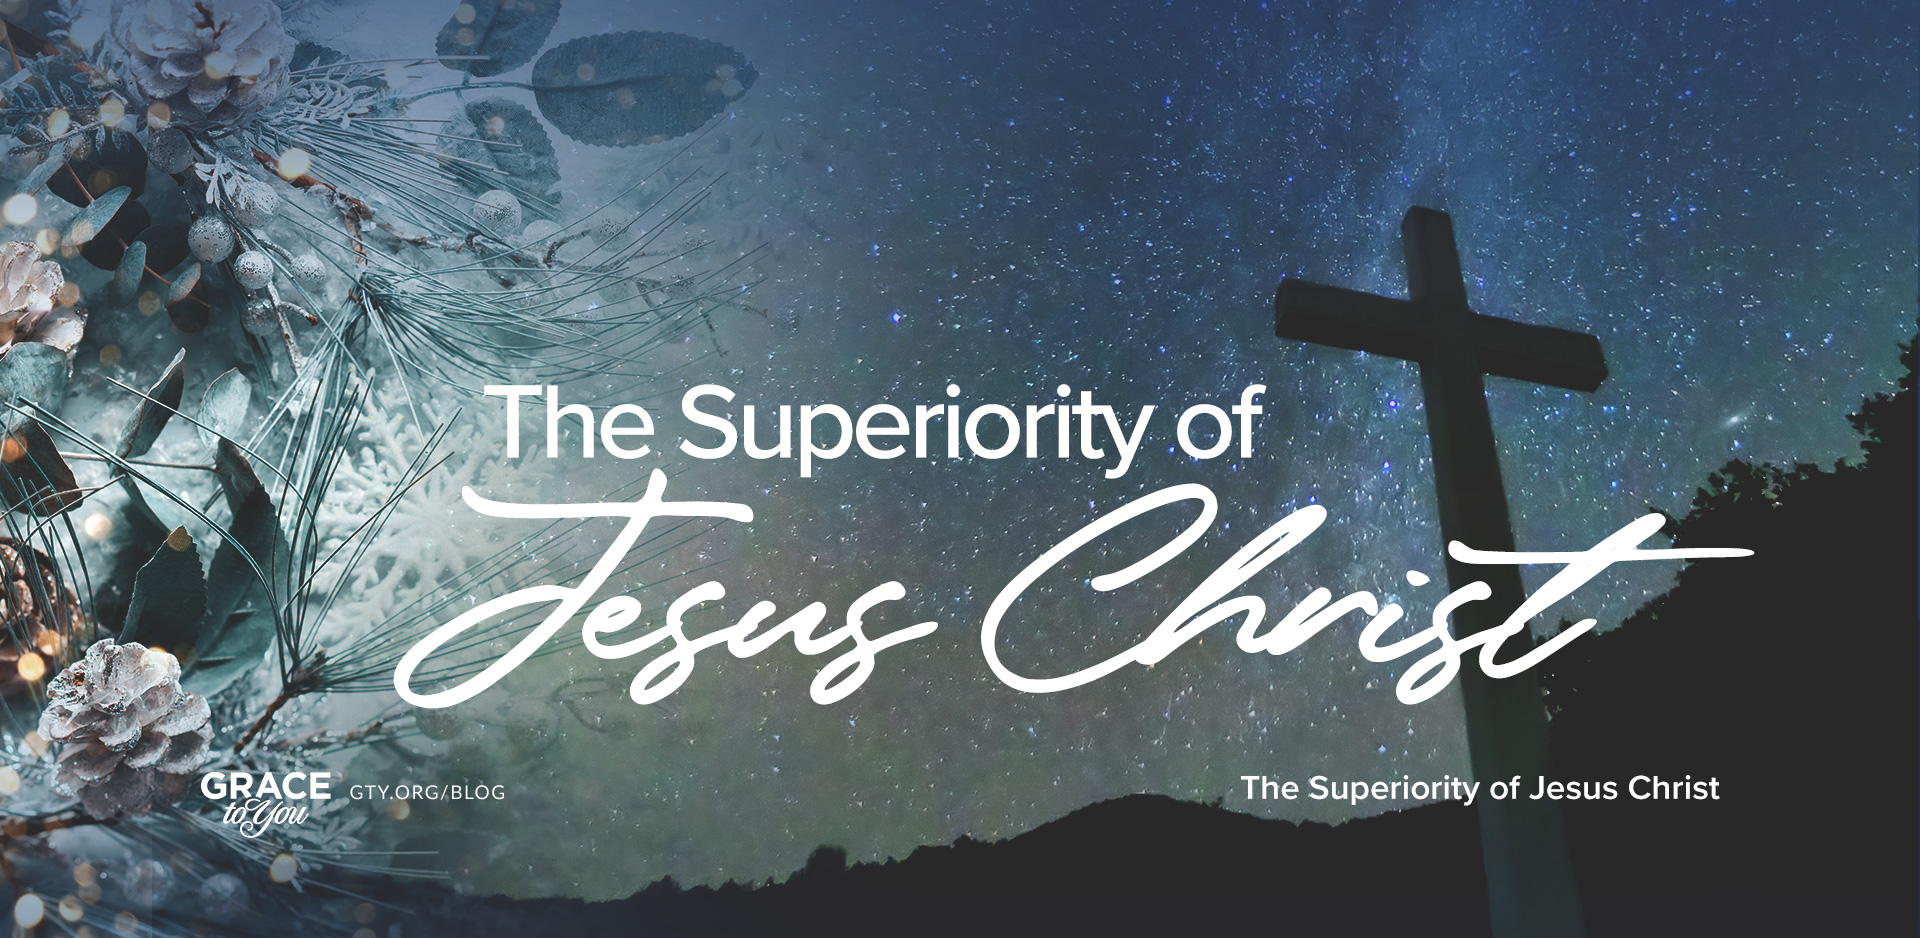 The Superiority of Jesus Christ